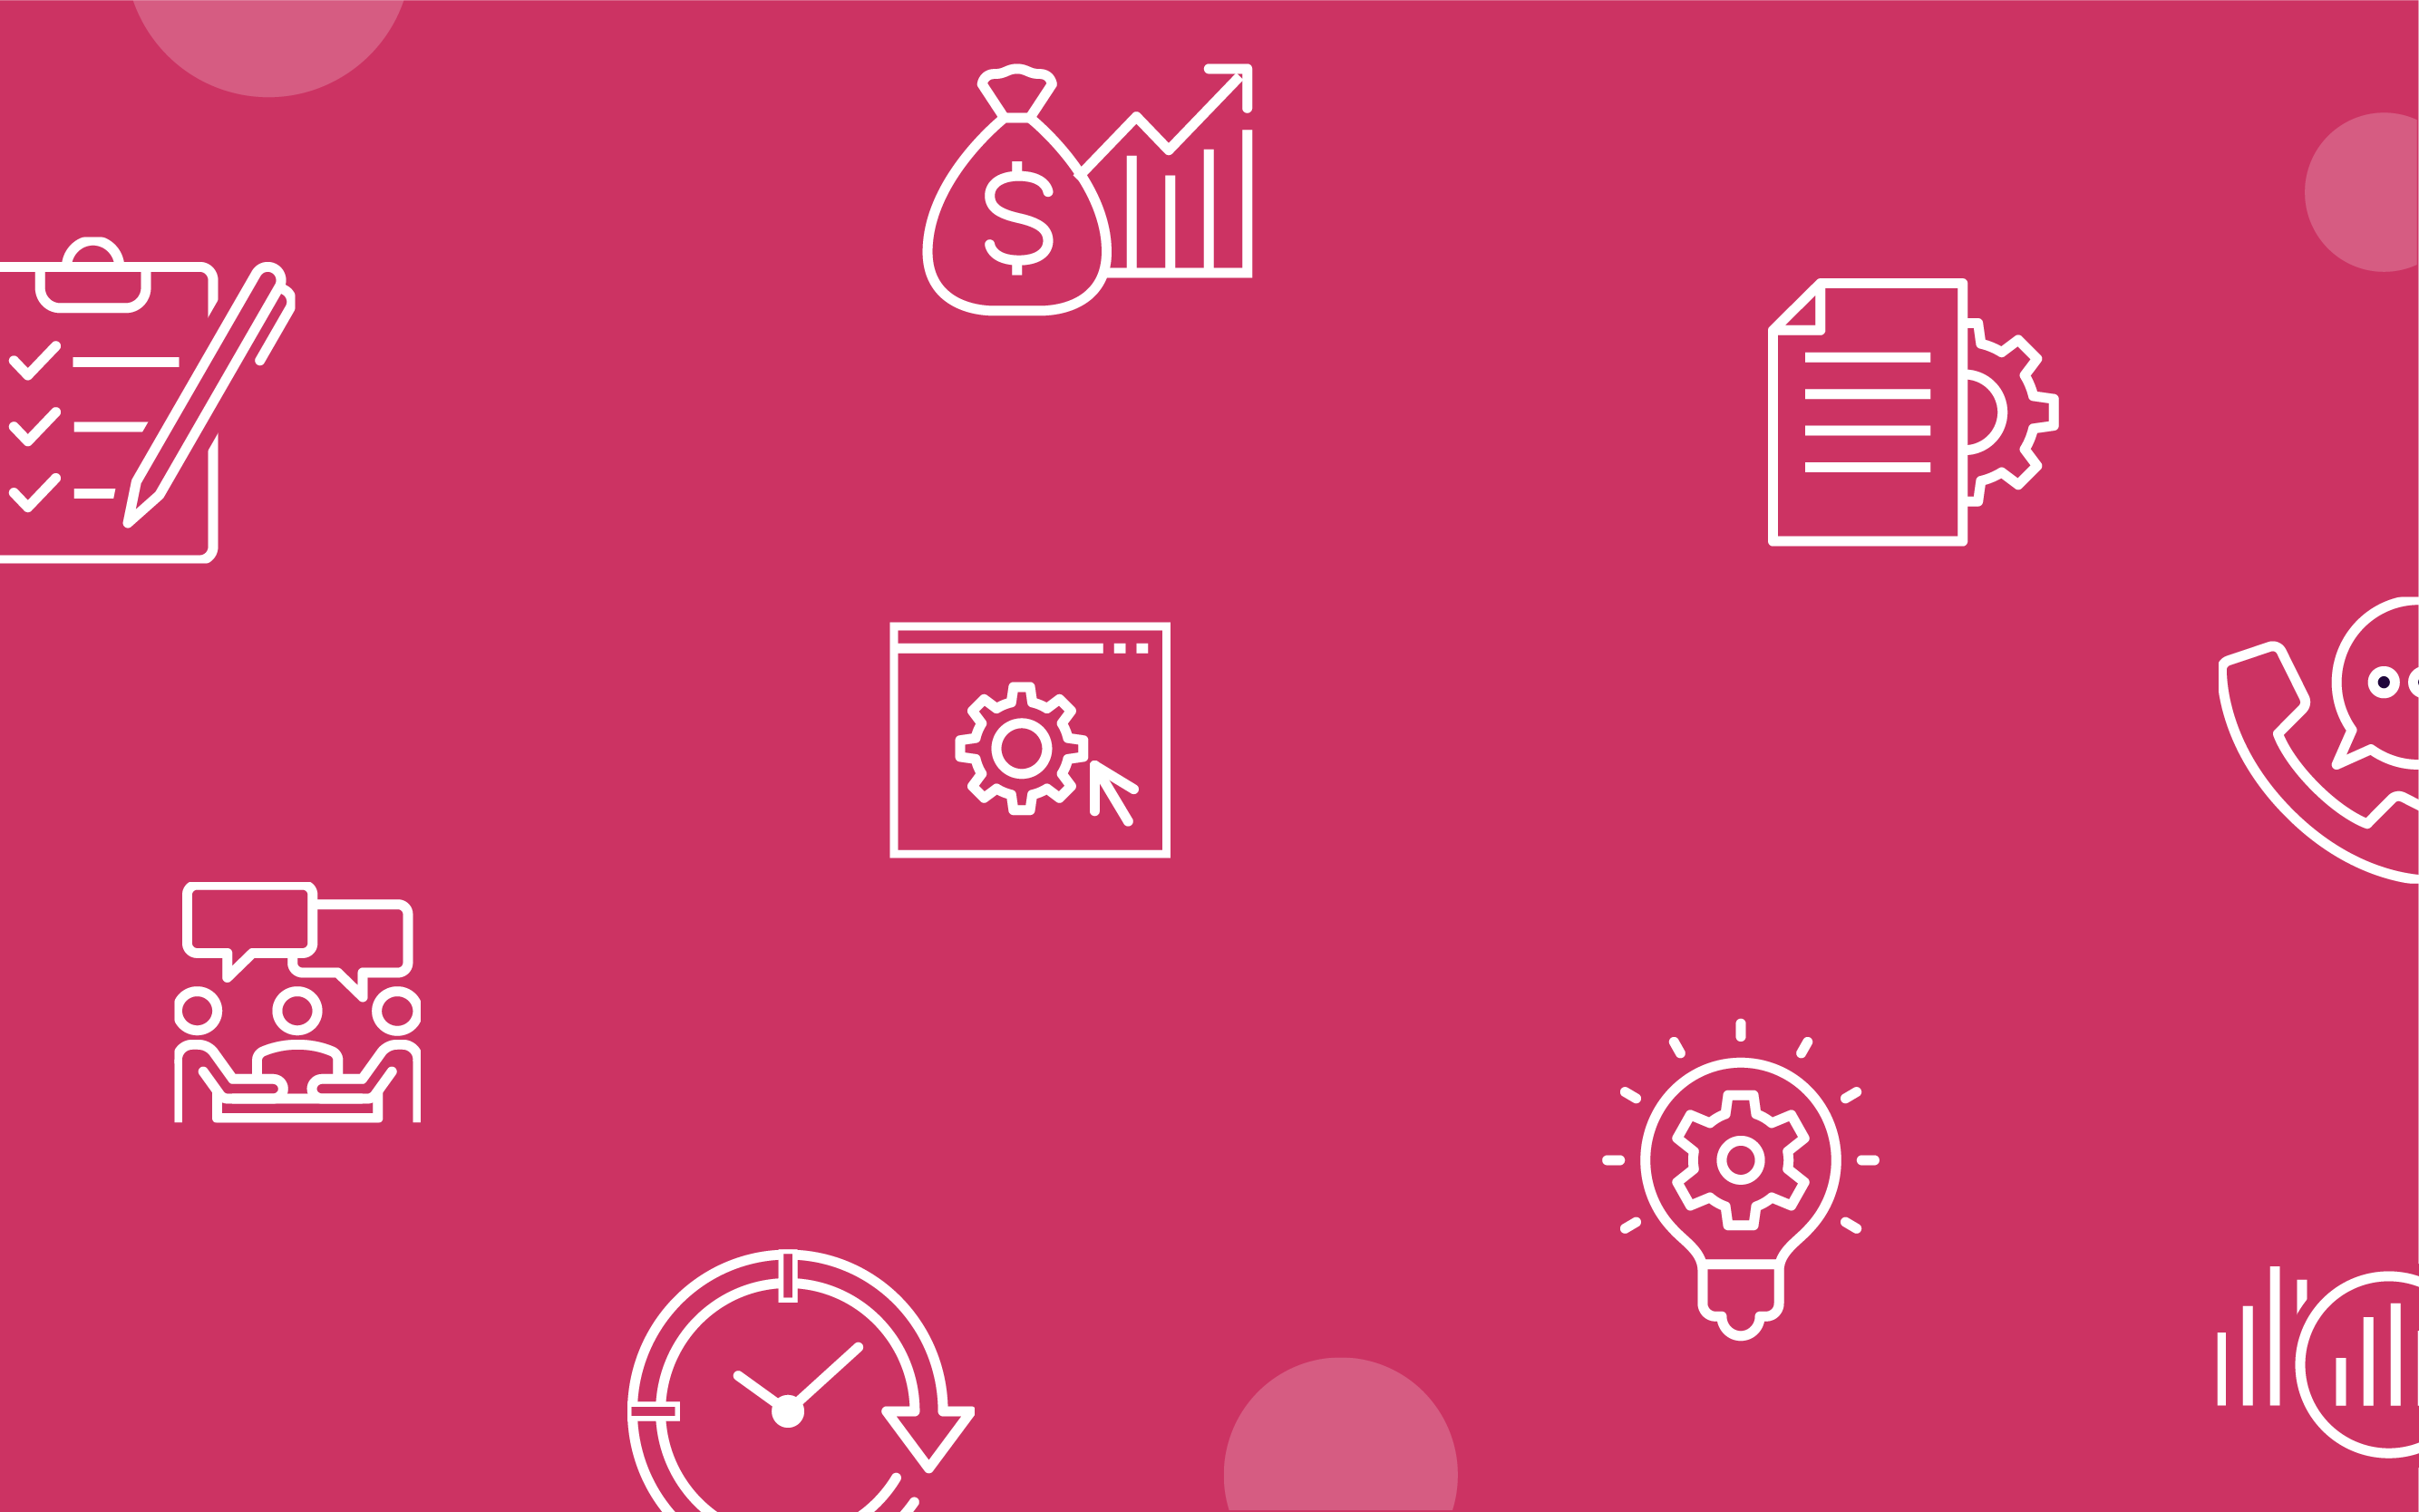 red background with various icons including a bag of money, lightbulb, and a gear